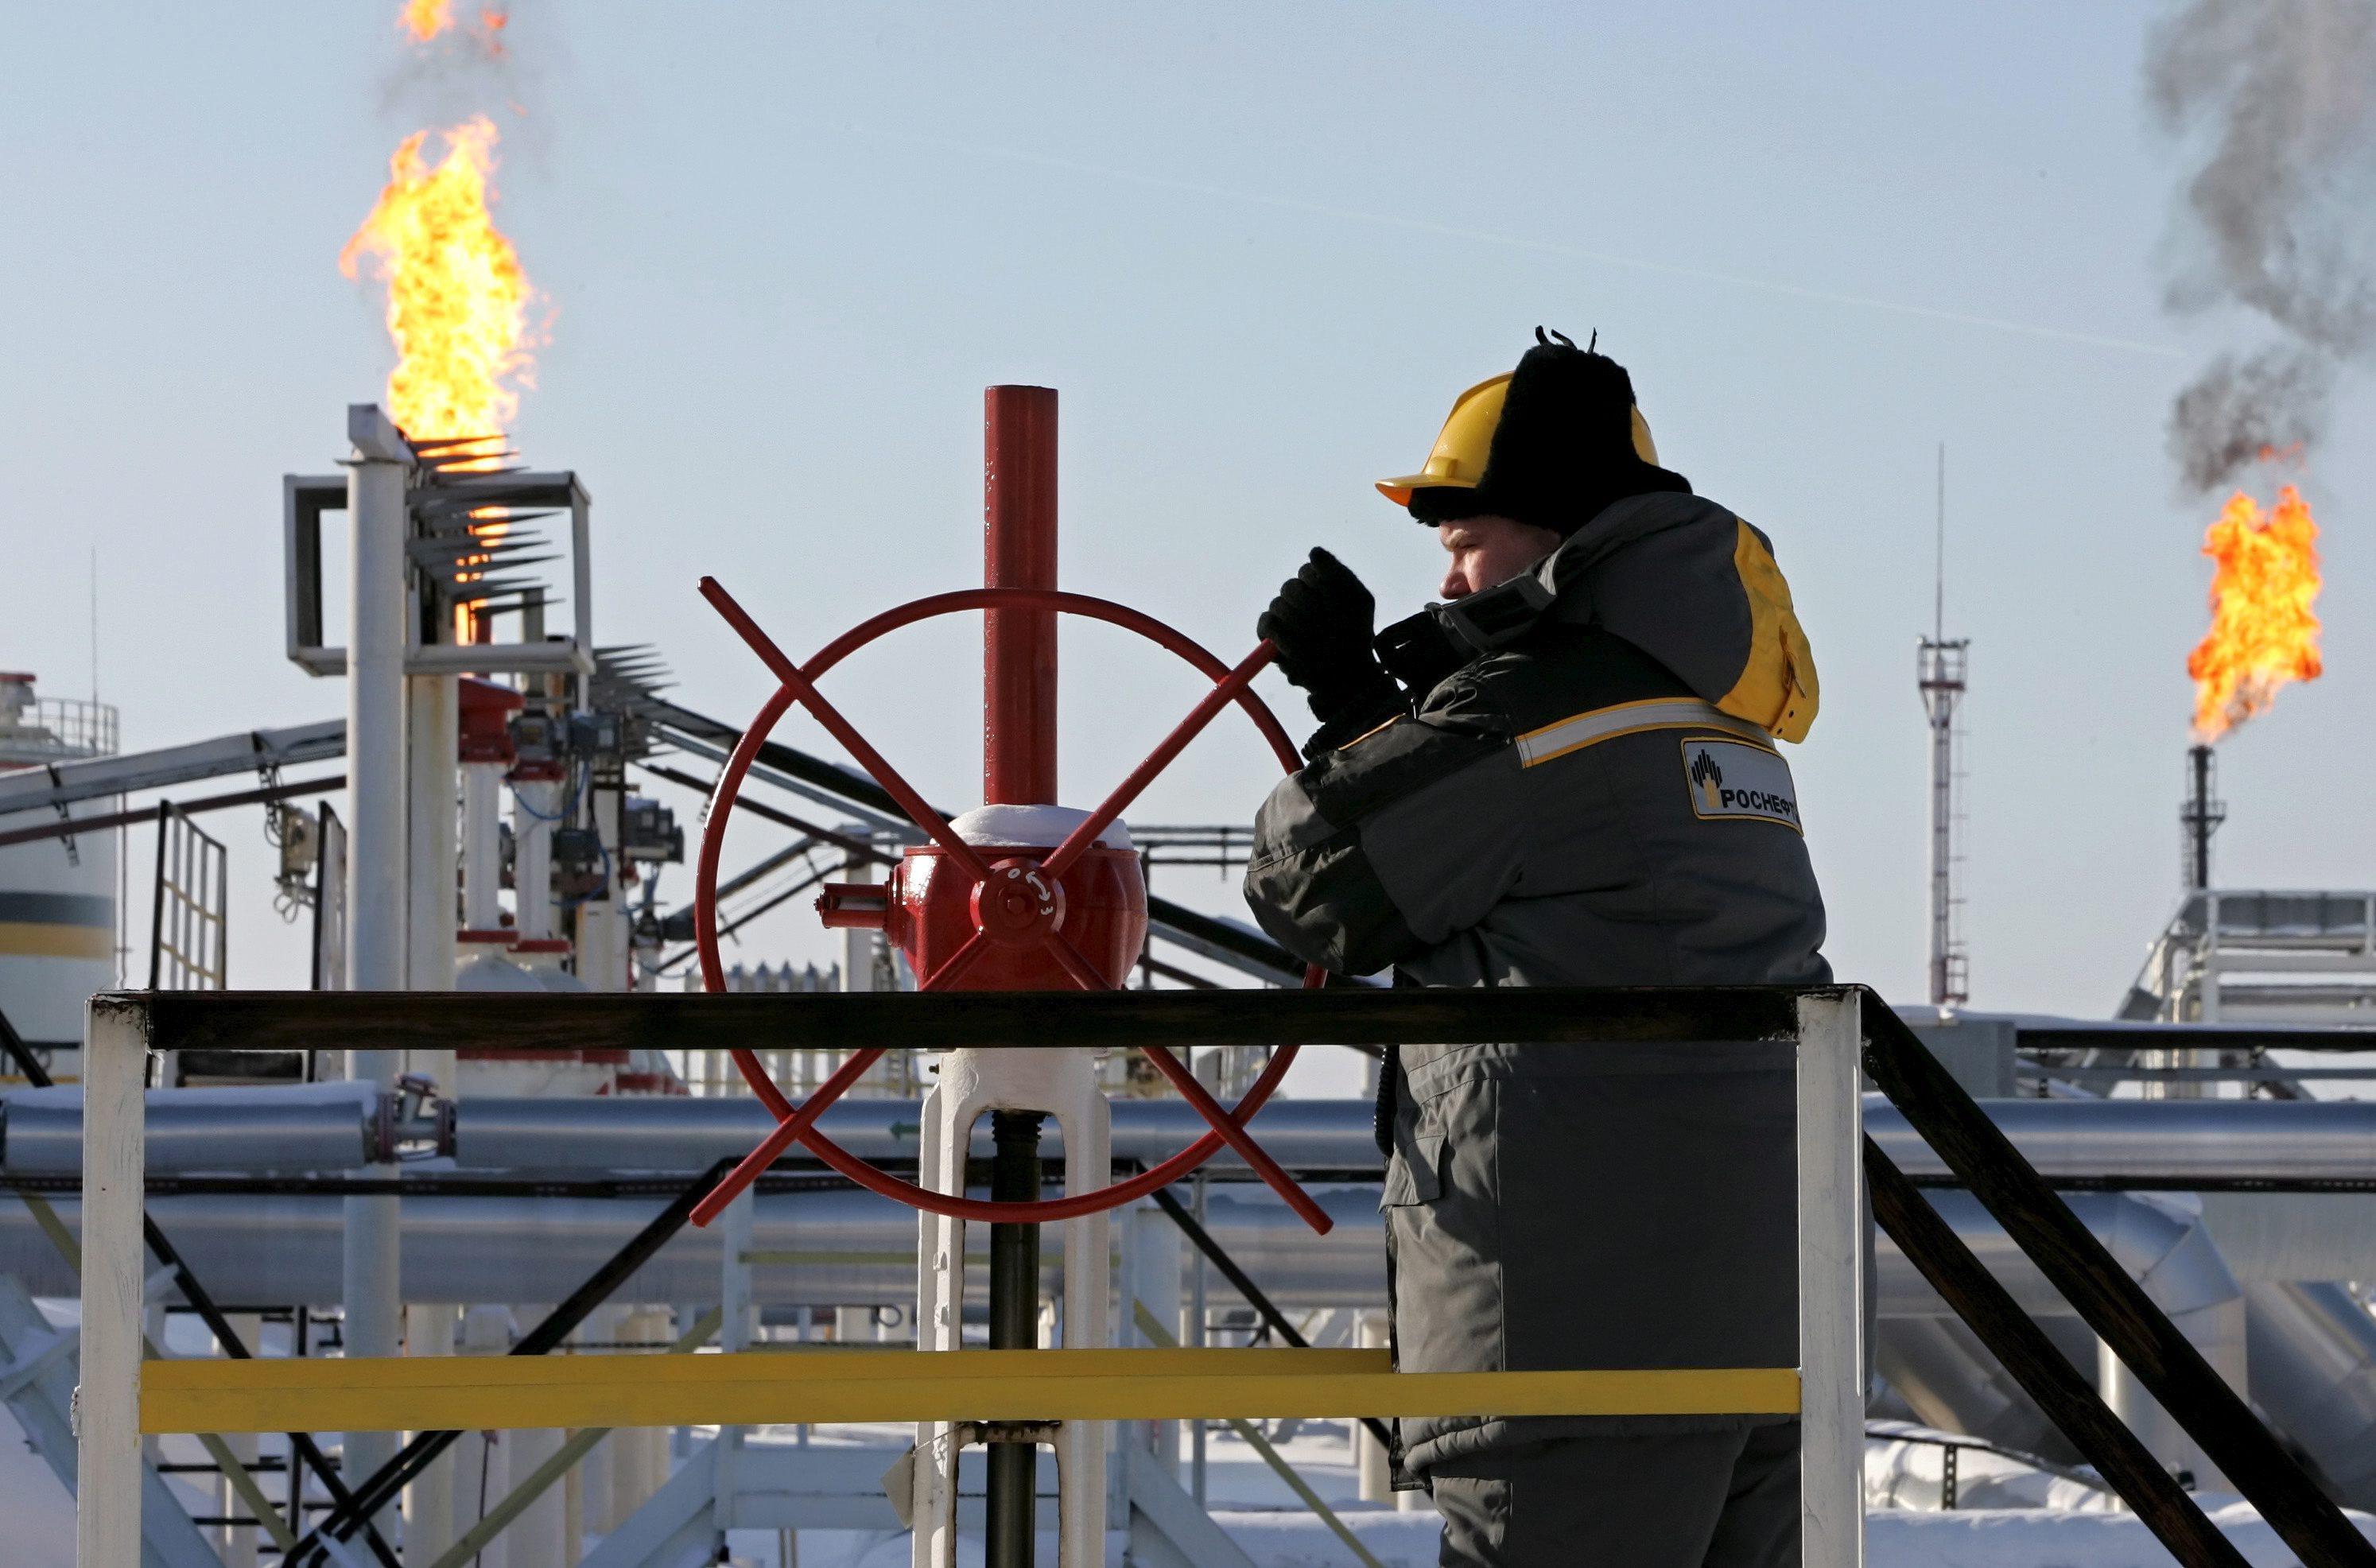 Transporting crude oil across a frigid environment requires the liquid to be kept at a temperature above freezing point, which is becoming a problem, researchers say. Photo: EPA